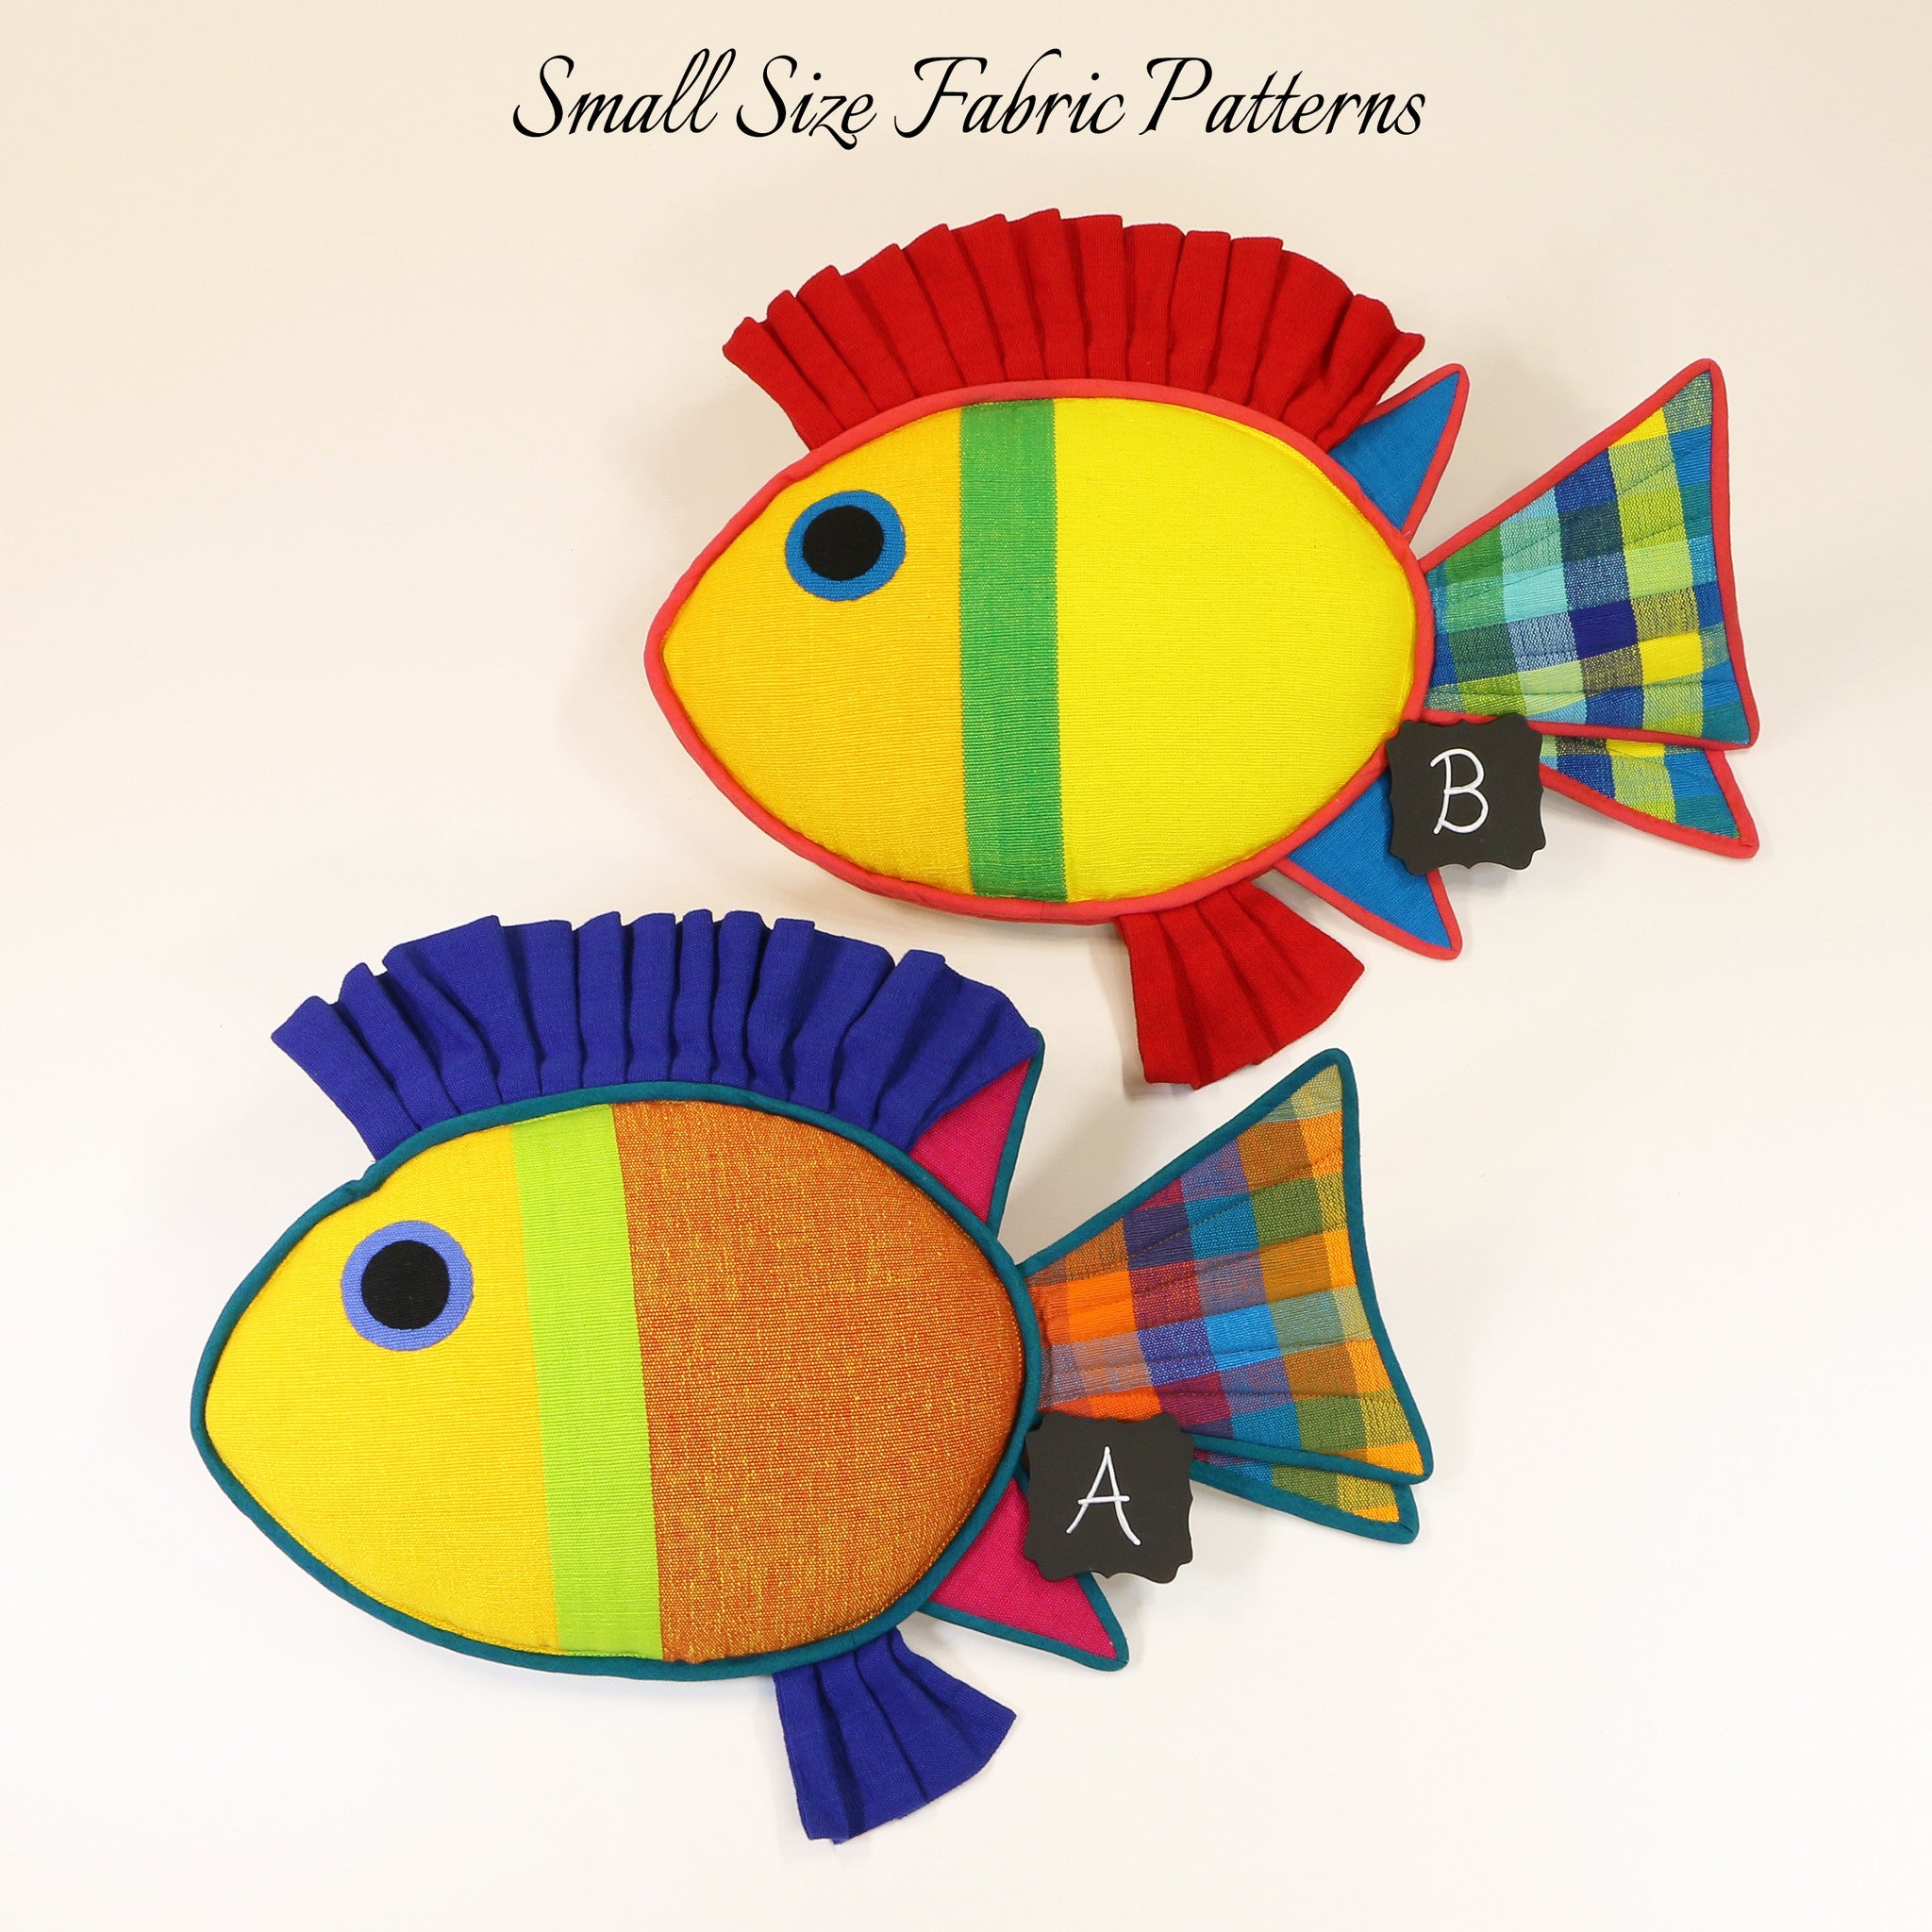 Kirby, the Rabbit Fish – all small size fabric patterns shown